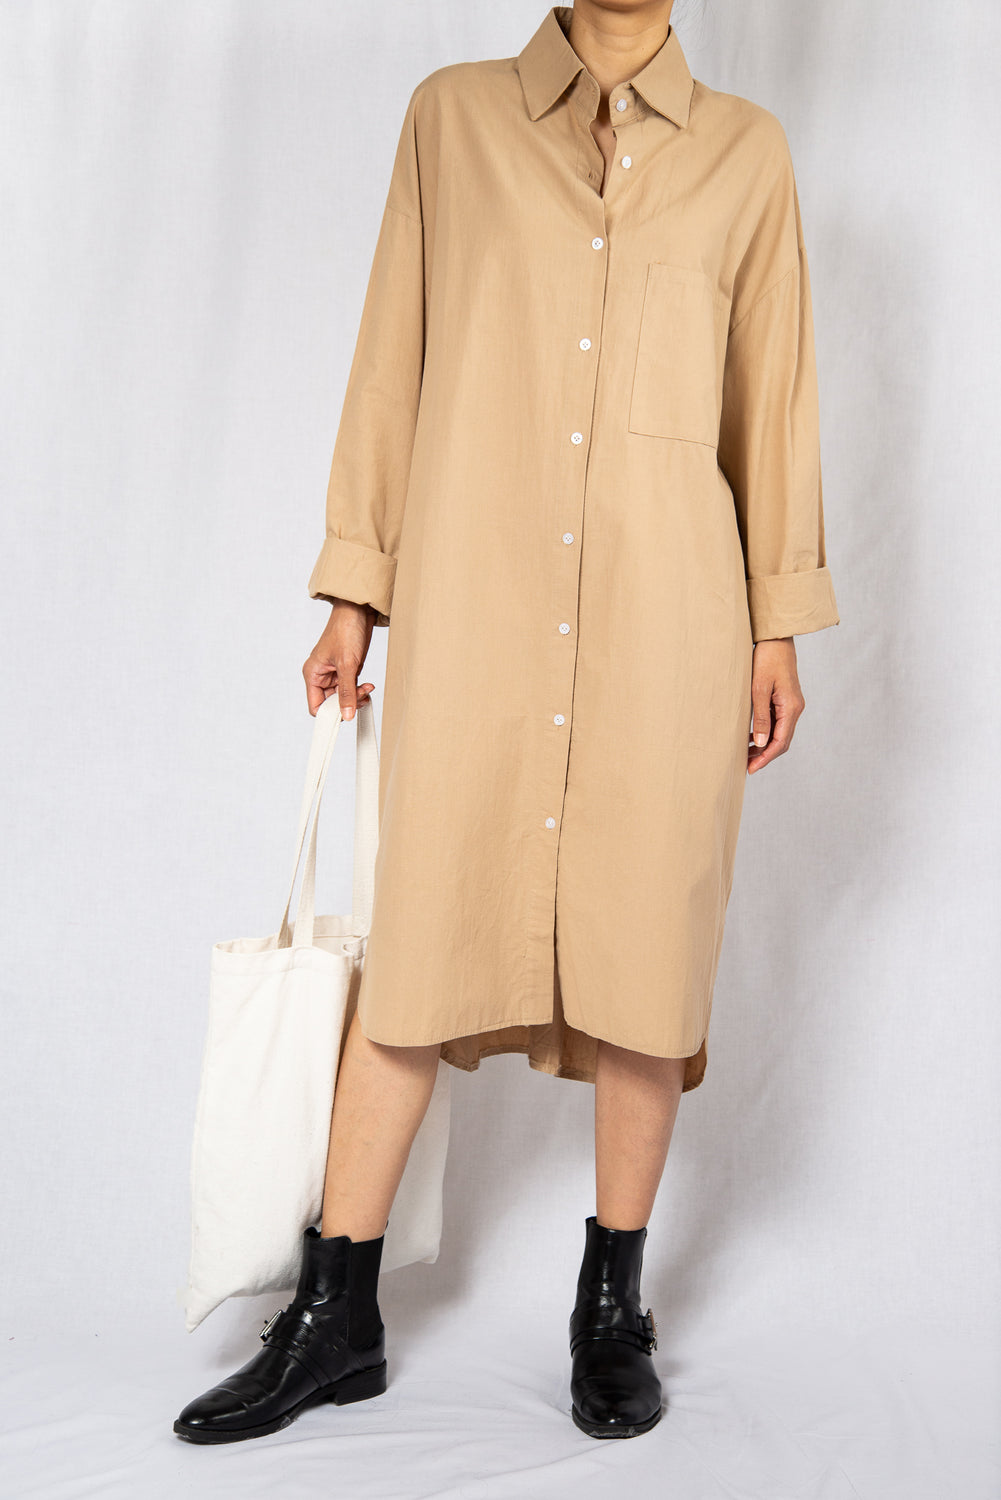 MODZ Beige Loose Midi Shirt Dress with Long Sleeves Modest Oversized Knee-Length Collared Dress in 100% Cotton